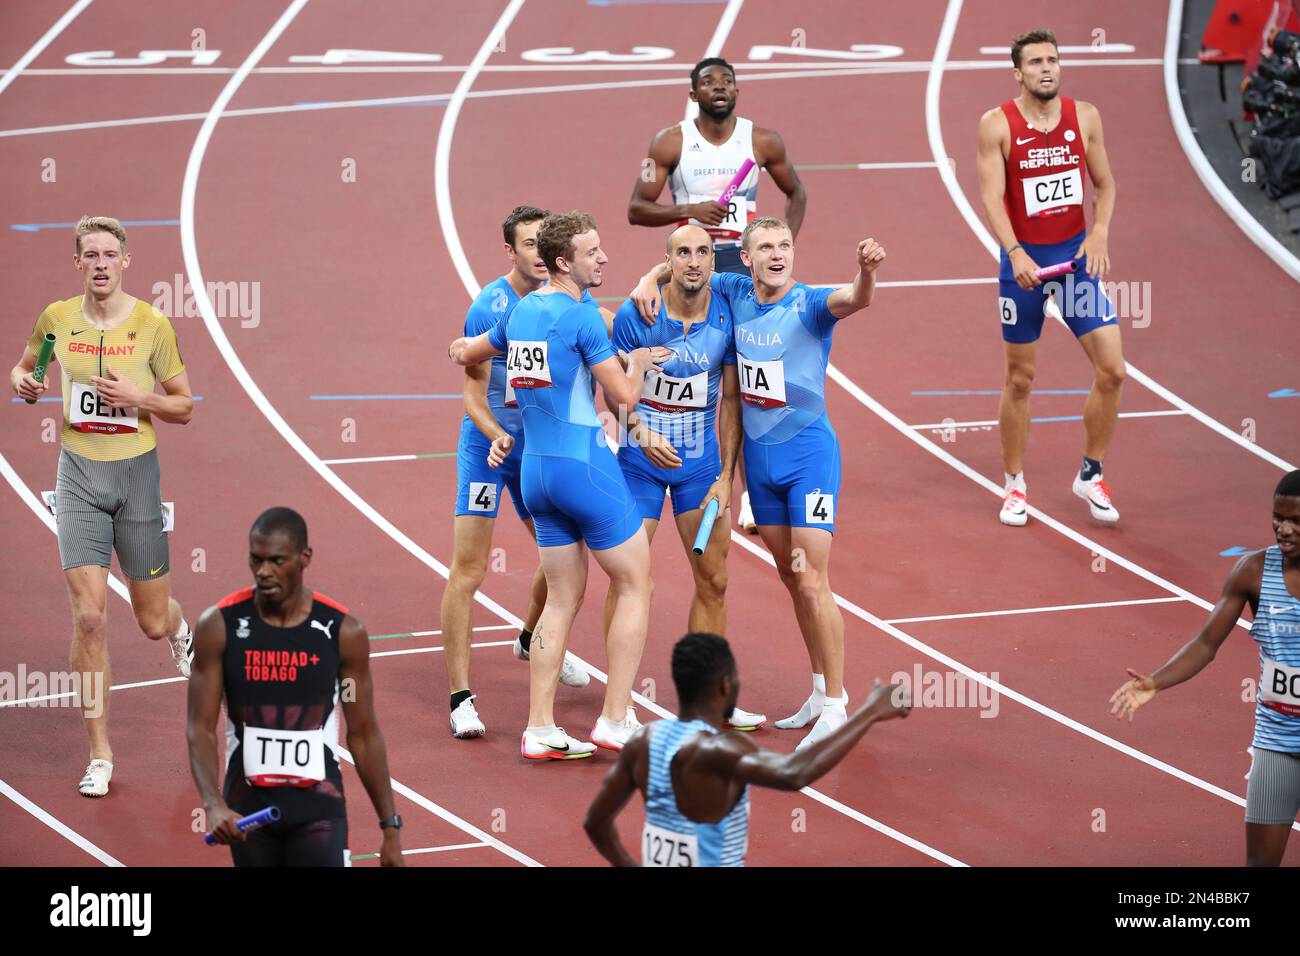 AUG 06, 2021 - Tokyo, Japan: Team Italy reacts to advancing in the Athletics Men's 4 x 400 Relay Final at the Tokyo 2020 Olympic Games (Photo: Mickael Stock Photo